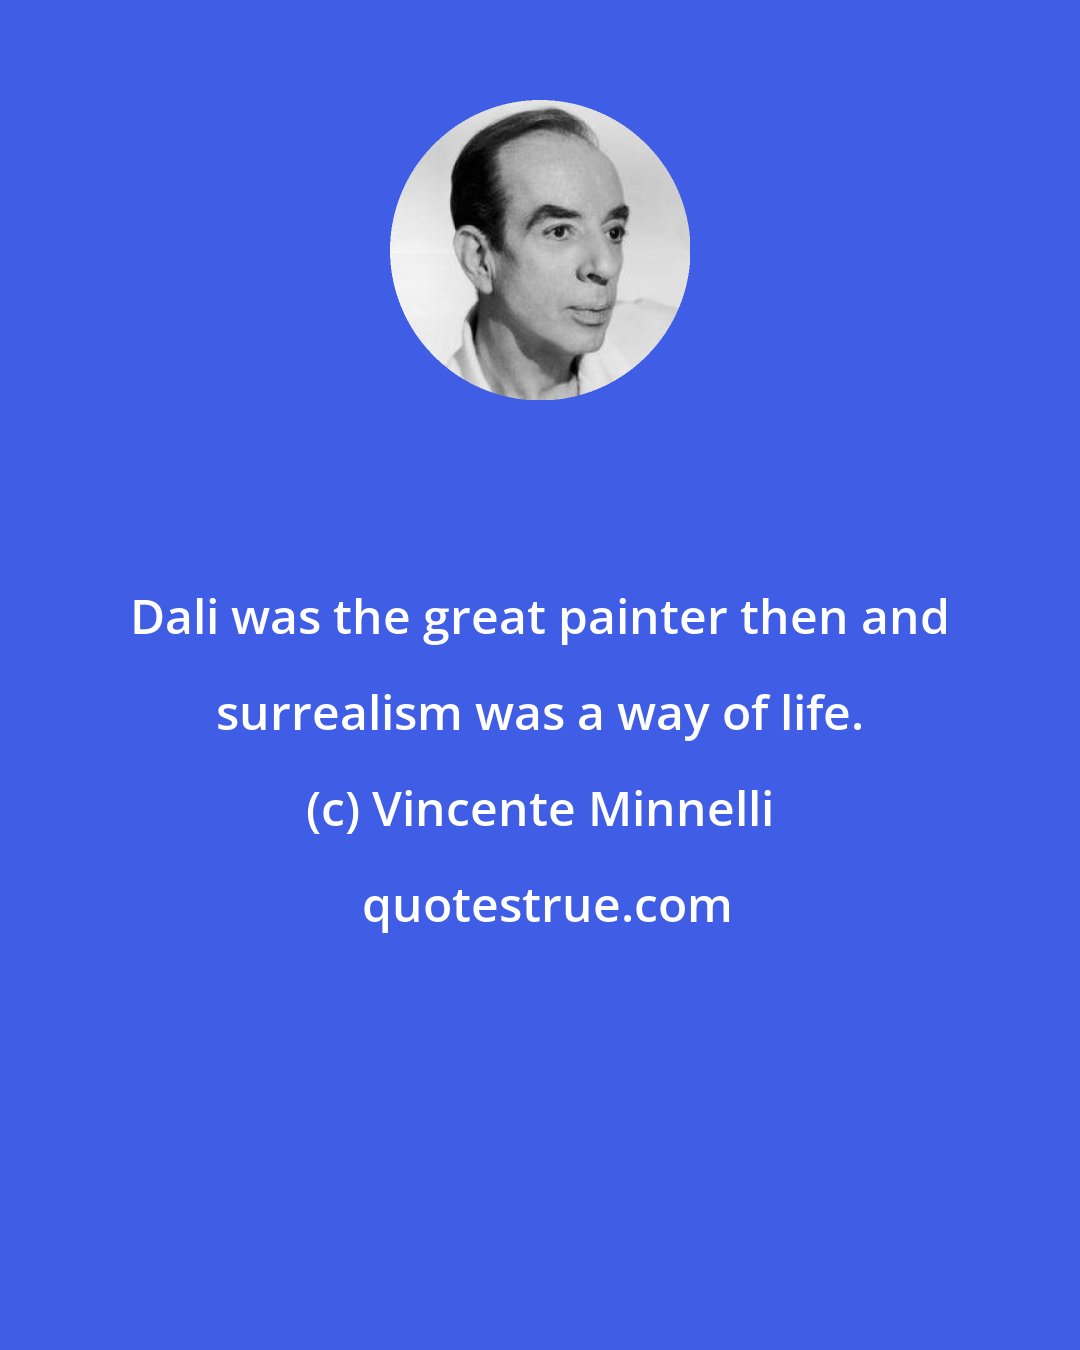 Vincente Minnelli: Dali was the great painter then and surrealism was a way of life.